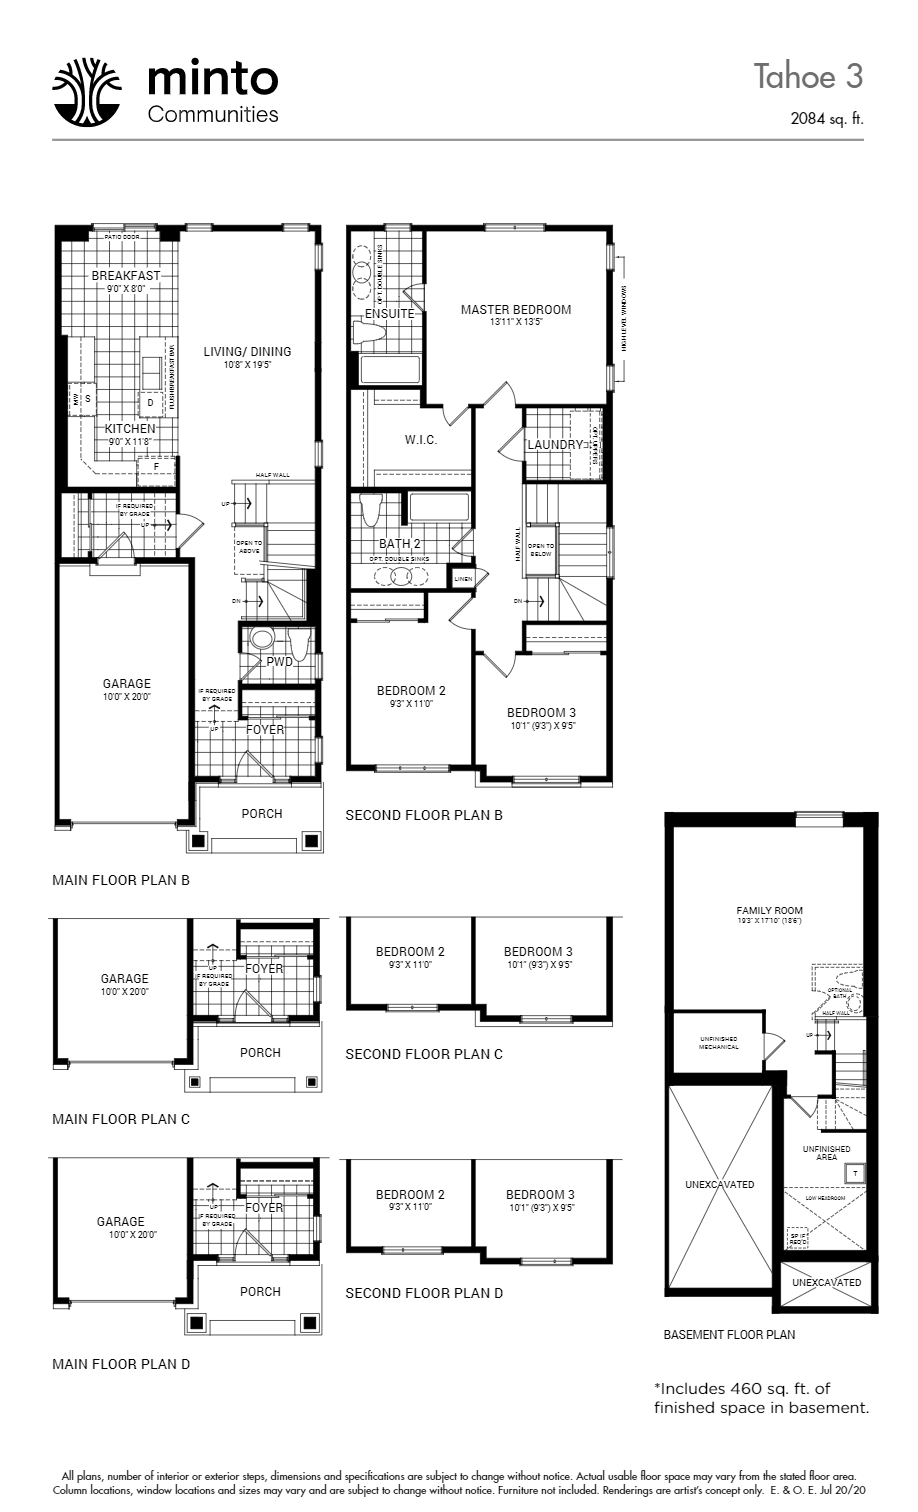 Tahoe End - 4 Bed Floor Plan of Avalon Vista by Minto Communities with undefined beds